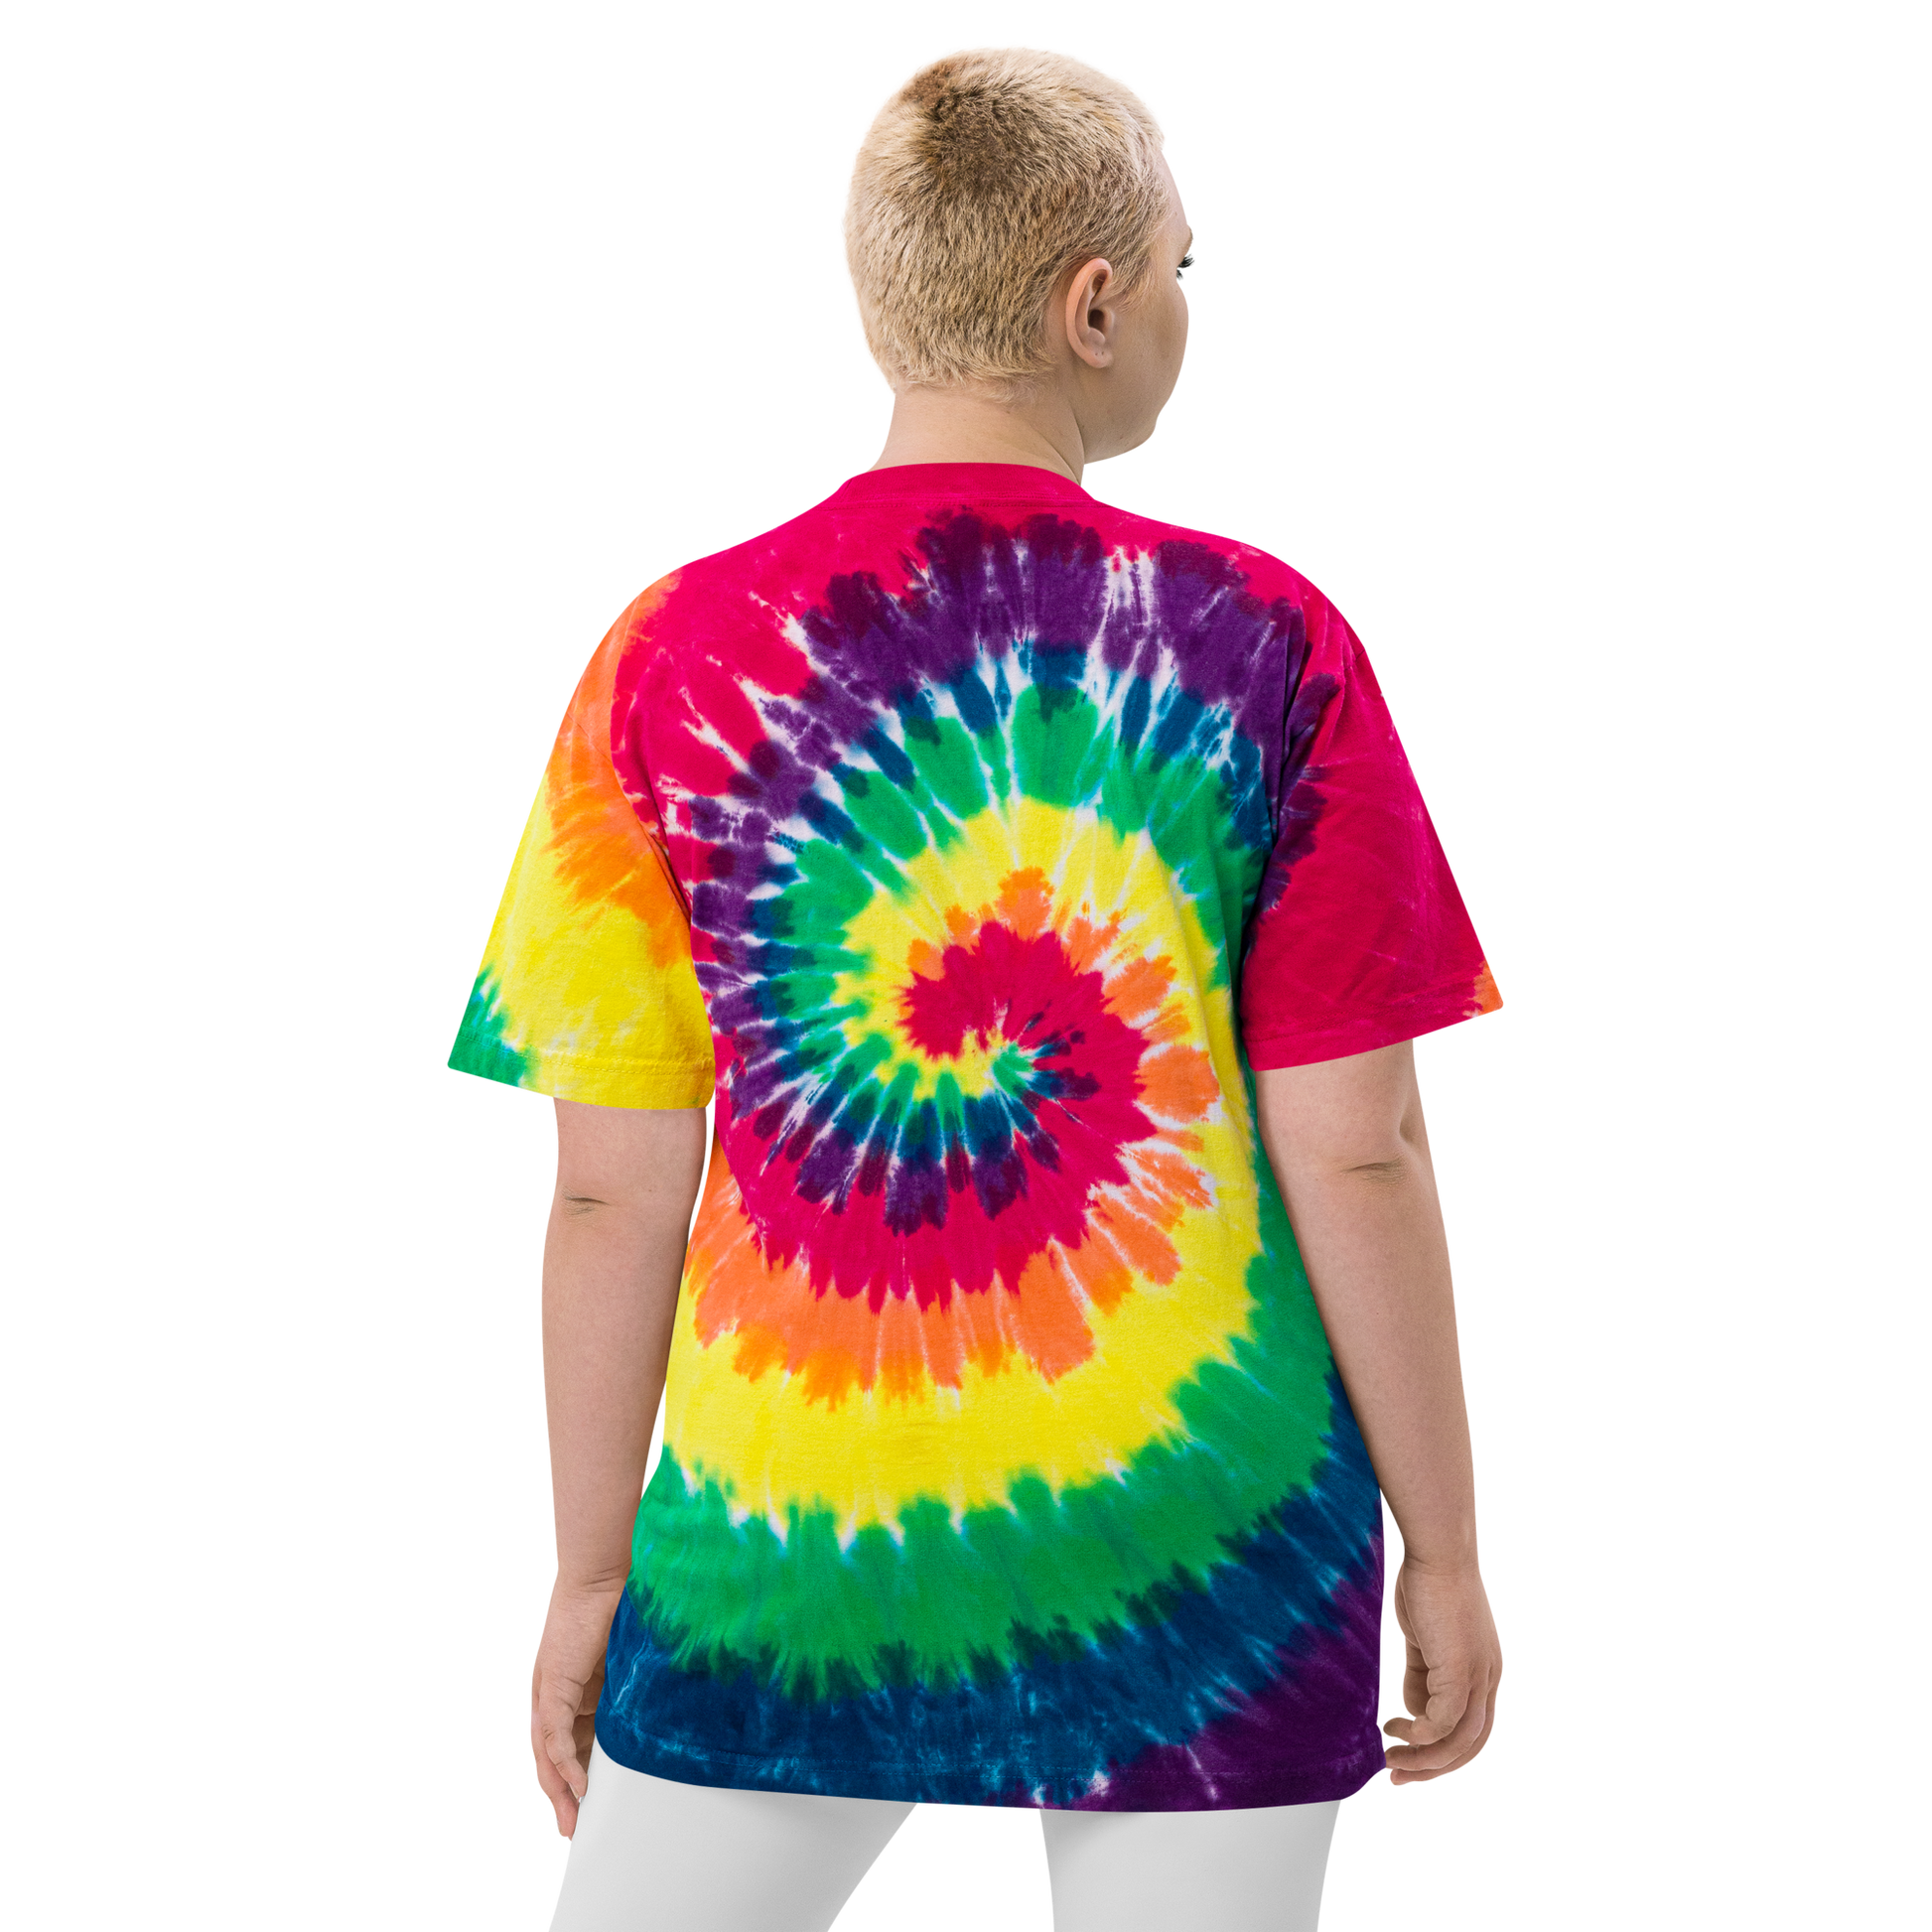 YHM Designs - YYC Calgary Oversized Tie-Dye T-Shirt - Crossed-X Design with Airport Code and Vintage Propliner - White Embroidery - Image 14